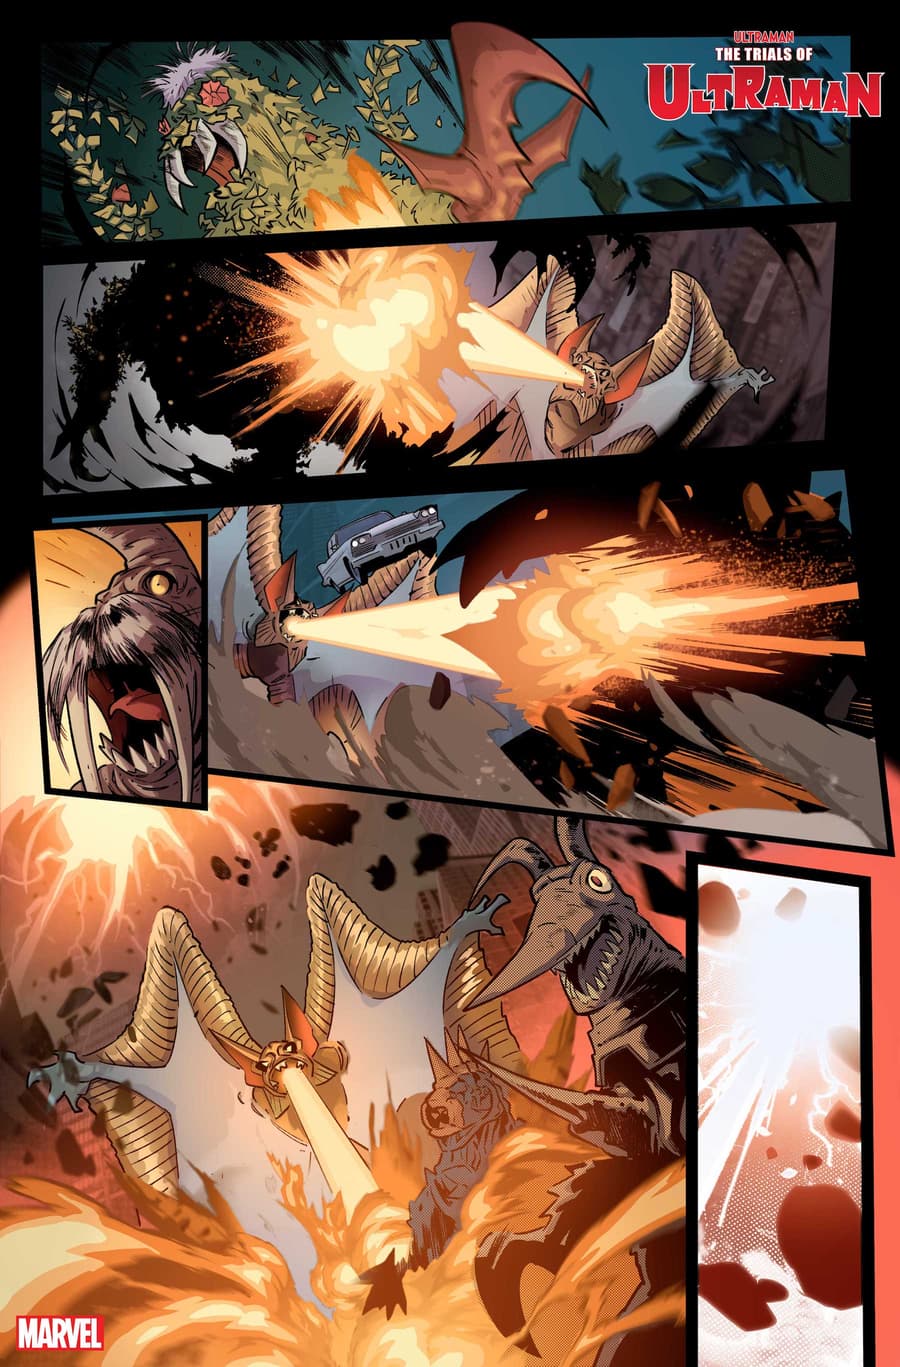 THE TRIALS OF ULTRAMAN #1 preview pages by Francesco Manna with colors by Espen Grundetjern